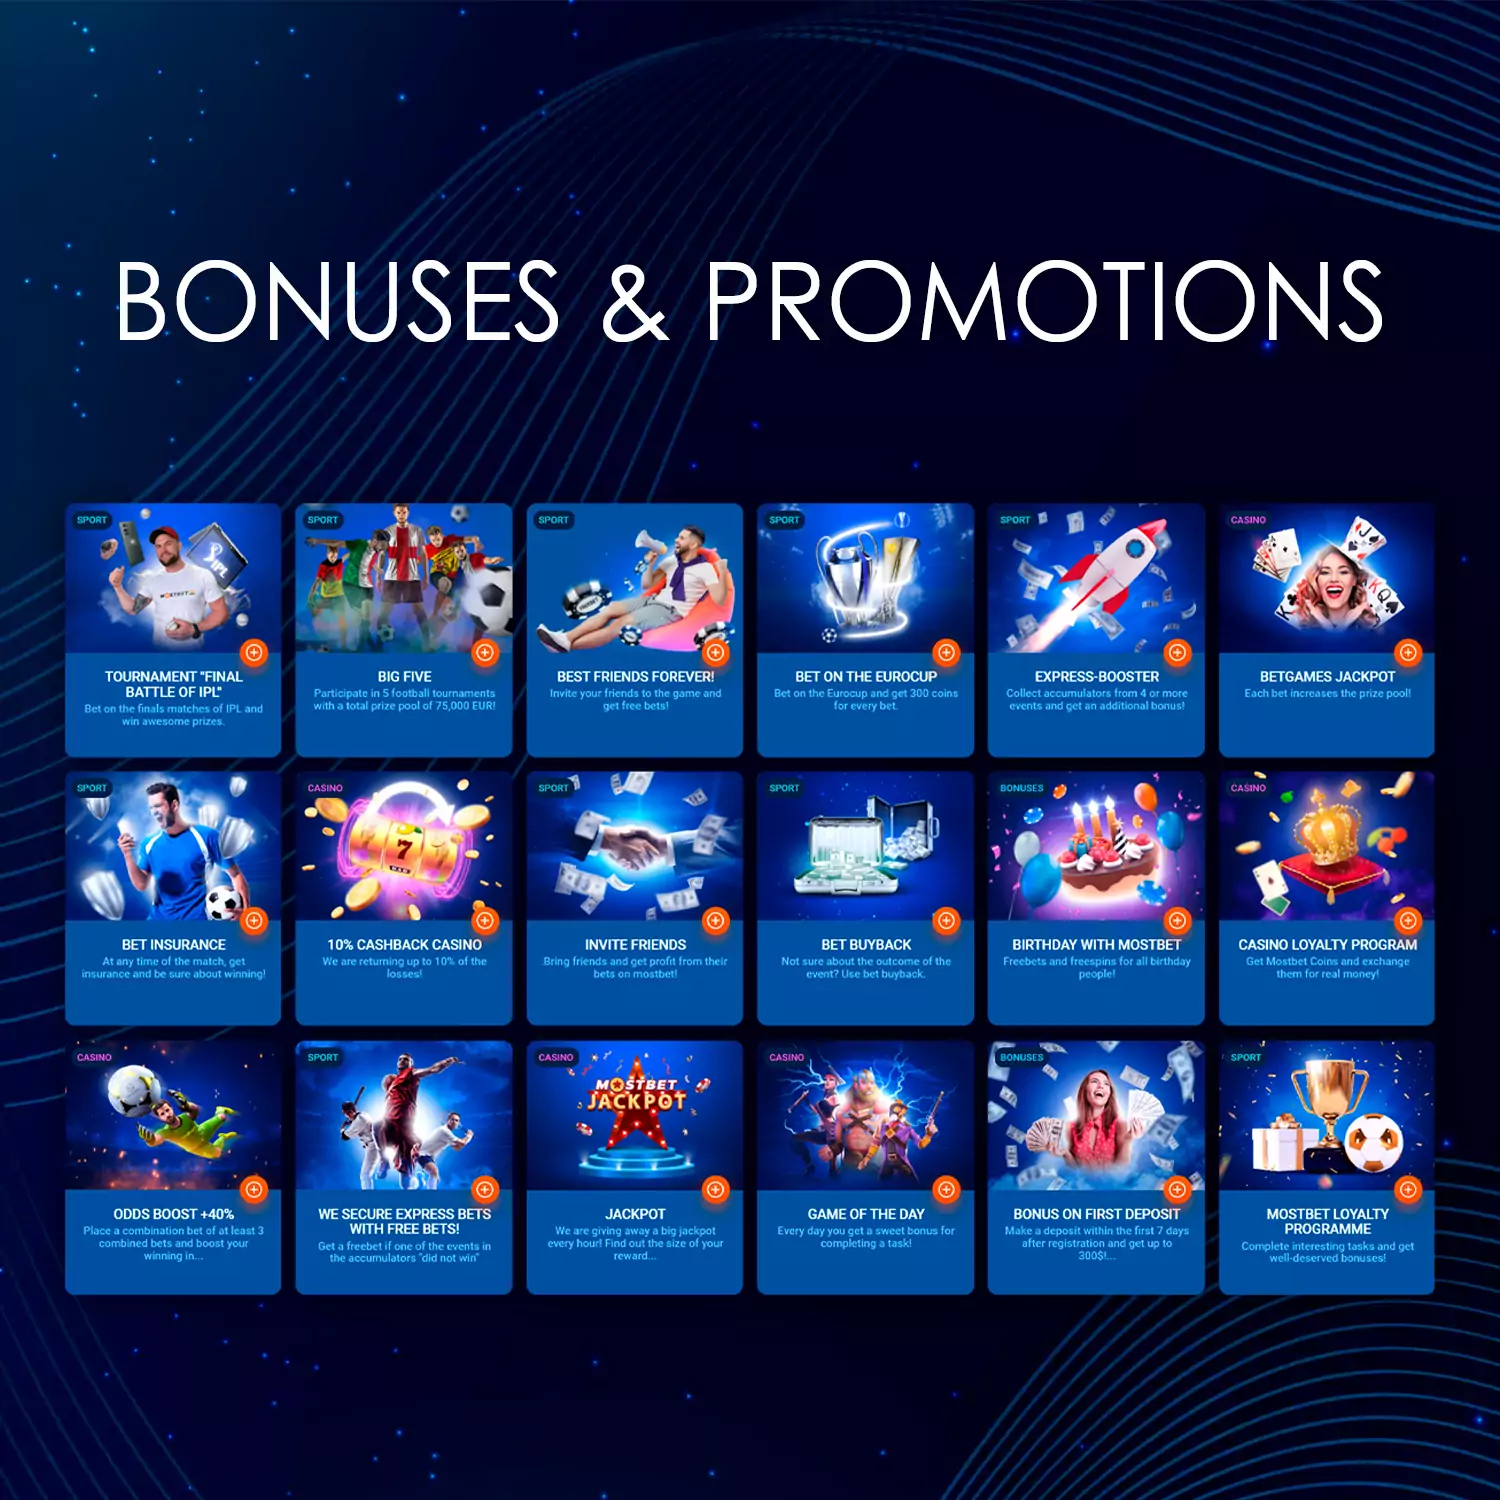 There are lots of bonuses and promos on the Mostbet you can find interesting and useful.